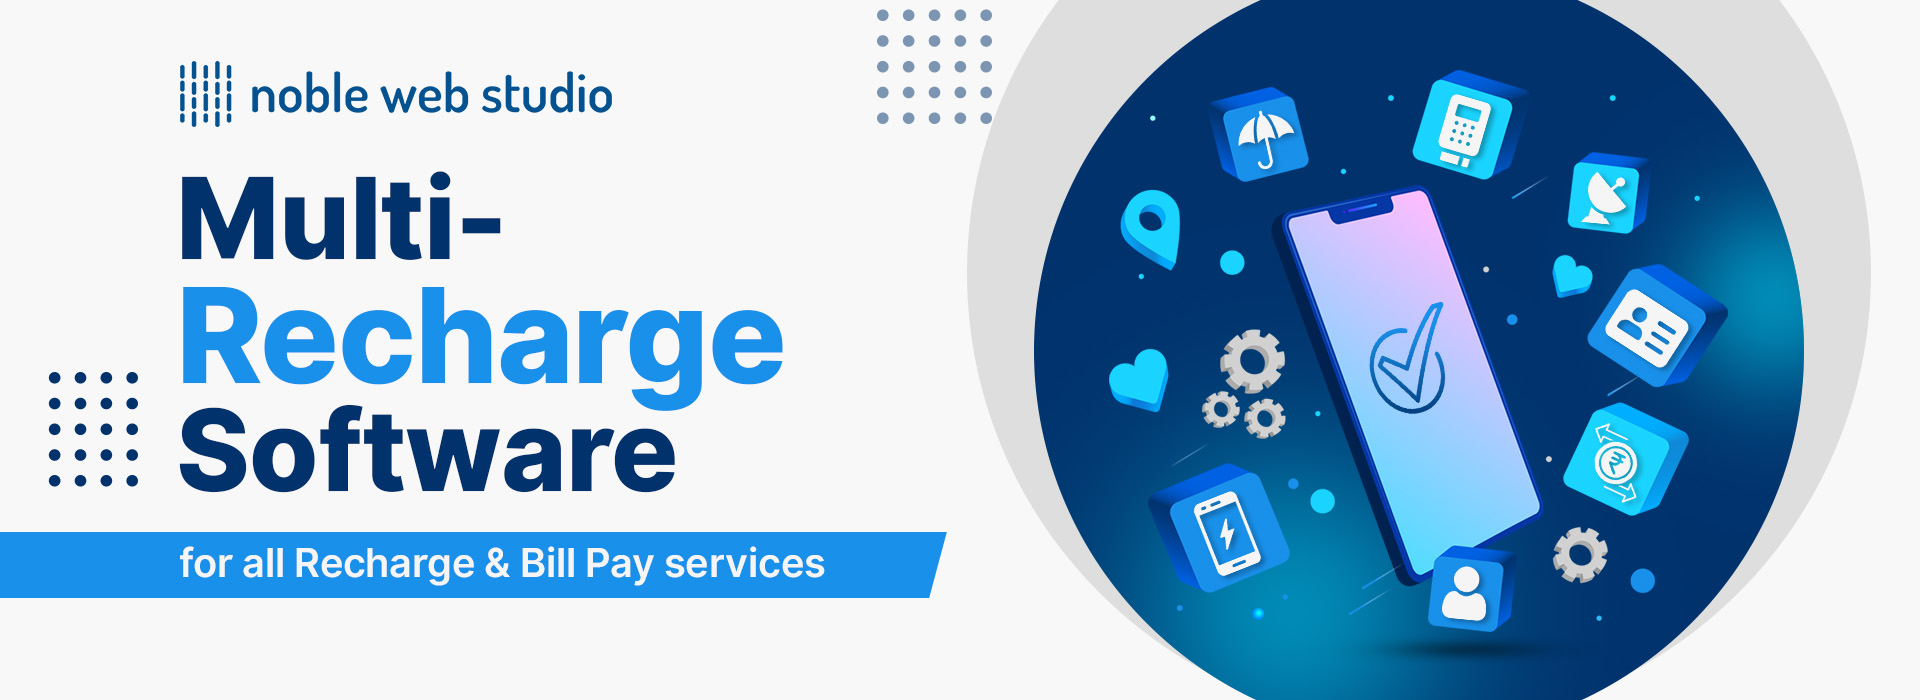 Multi recharge software for all recharge & Bill pay services